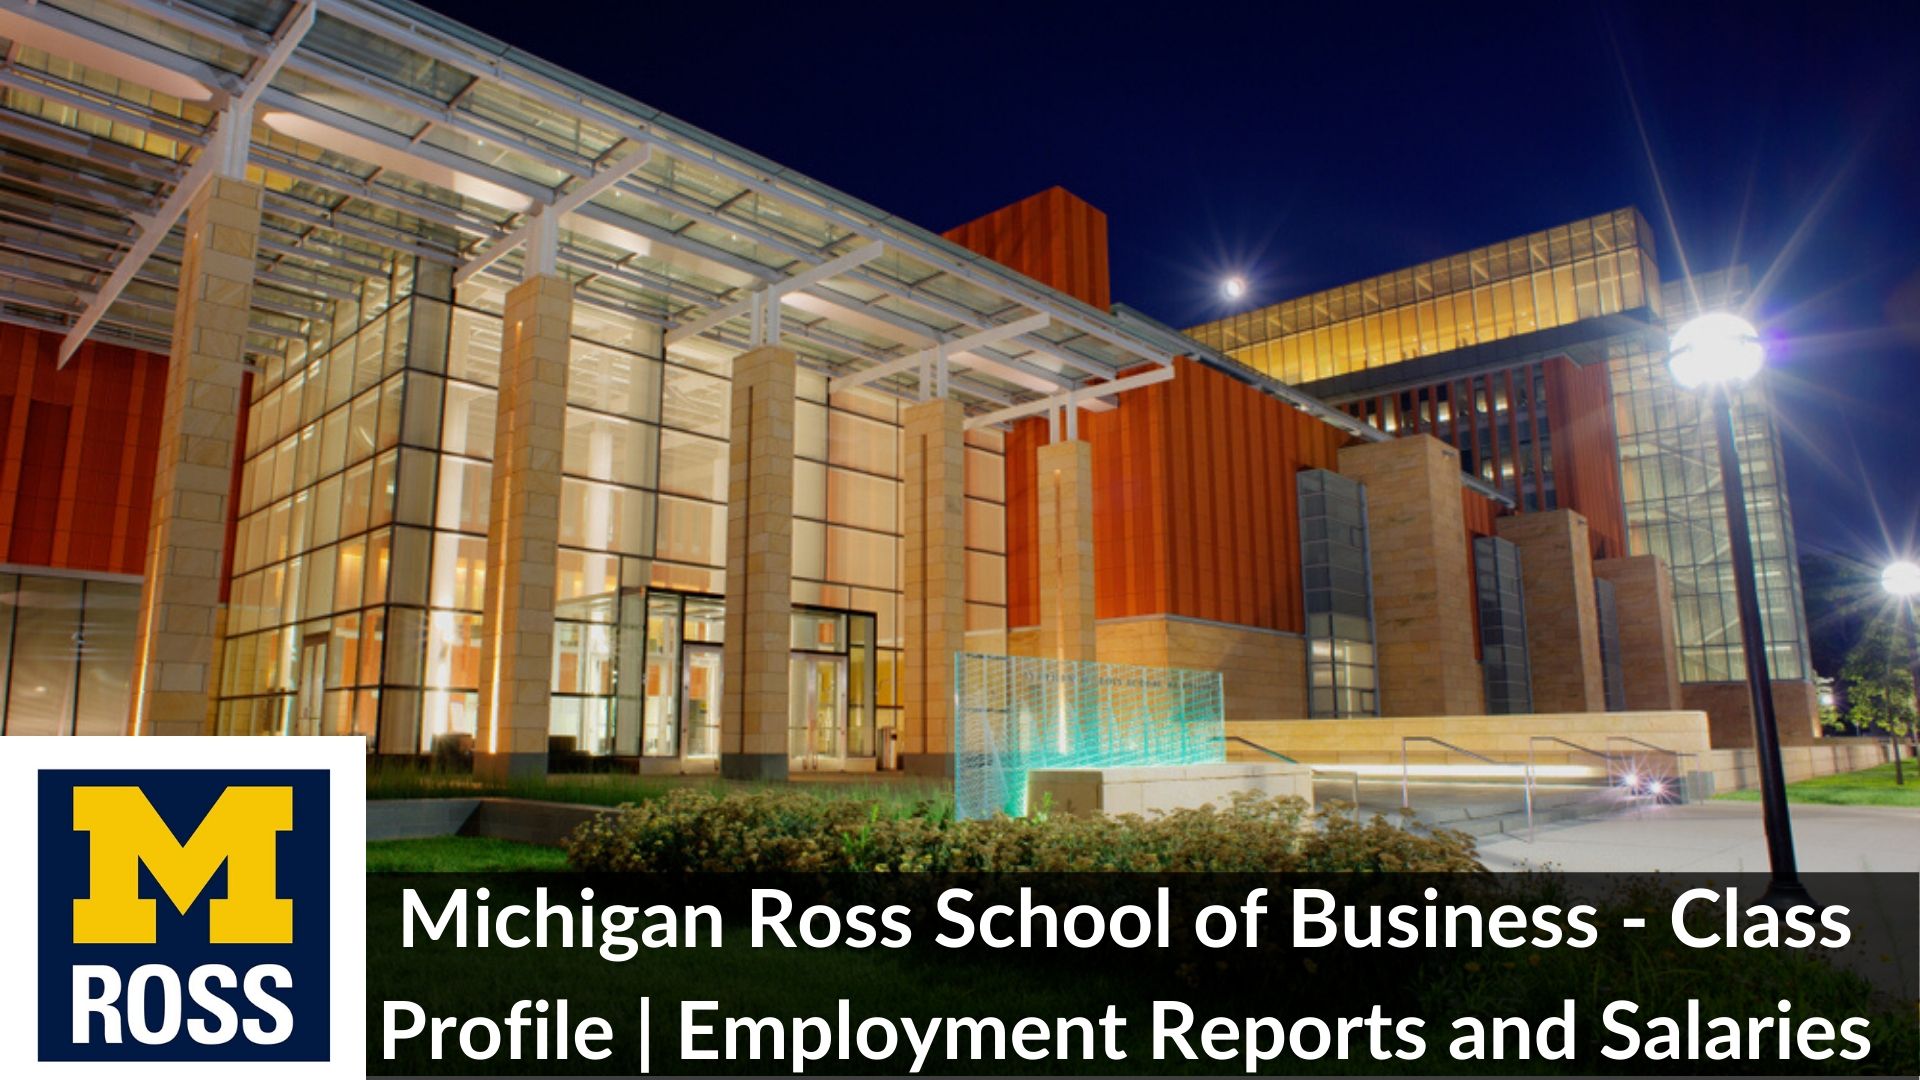 Michigan Ross School of Business MBA Guide 2023 – Class Profile and Employment report 2021